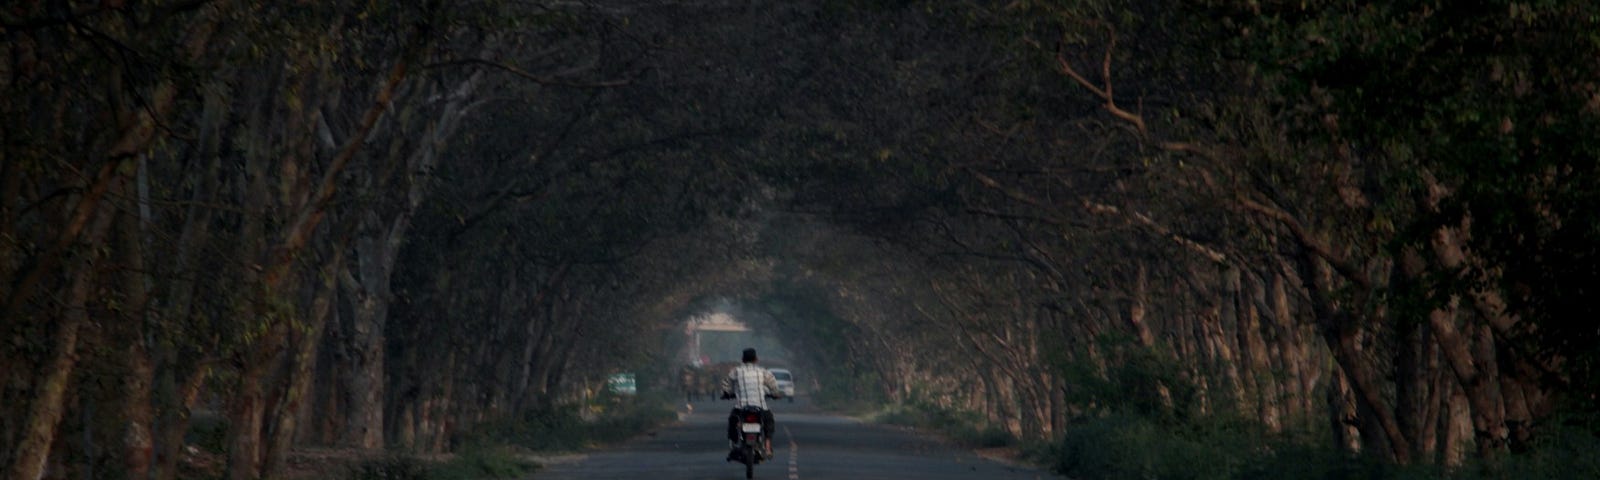 Rider on a motorcycle, no helmet, a straight road, trees making a tunnel overhead, light at the end